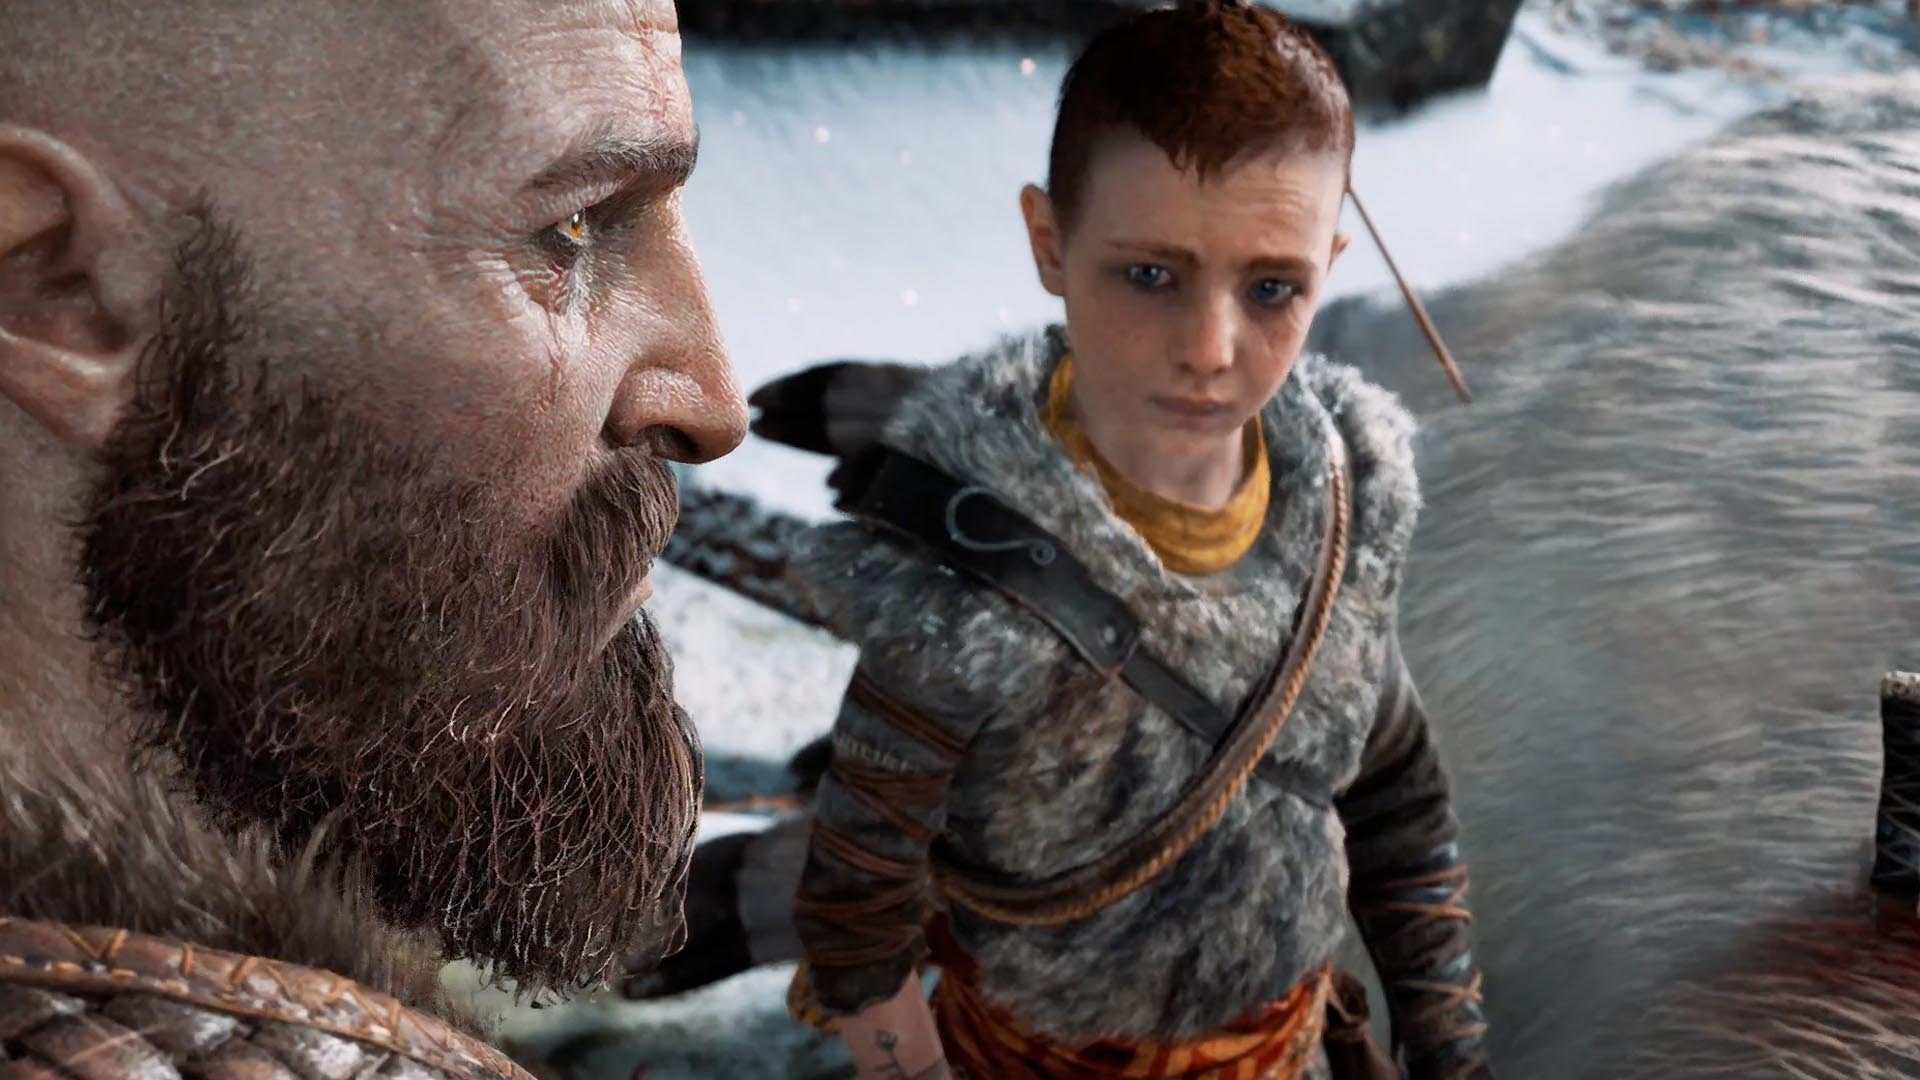 God of War - Kratos looks into the distance as Atreus looks up at him